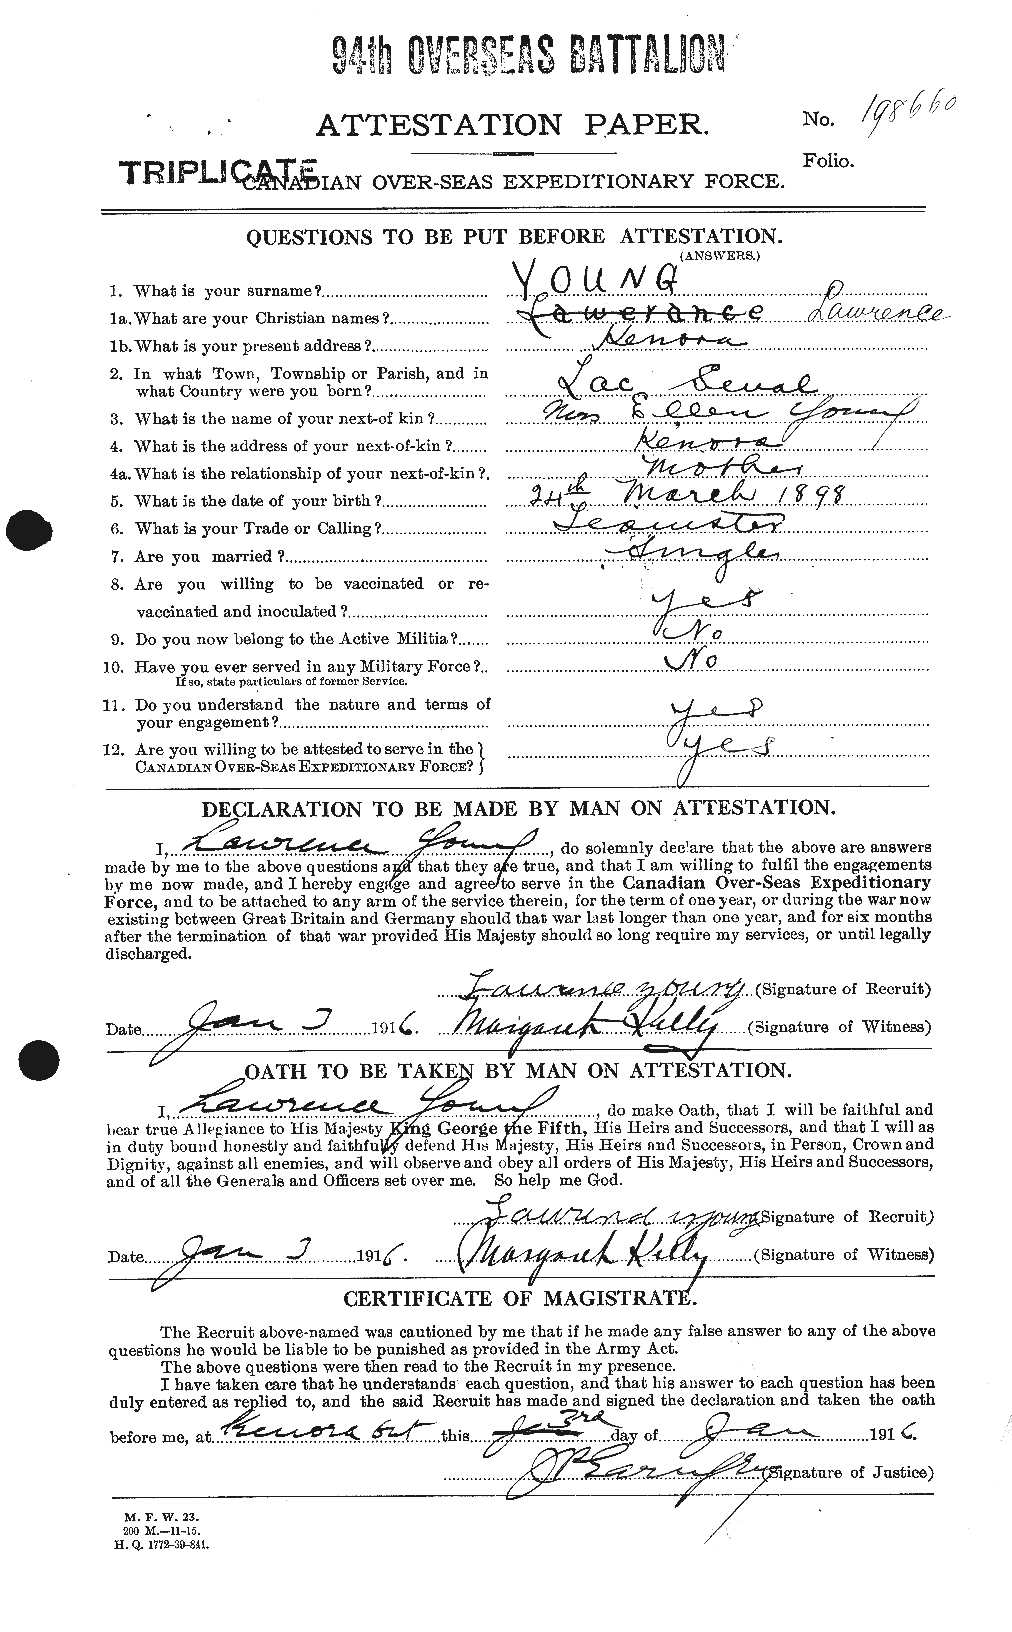 Personnel Records of the First World War - CEF 691715a